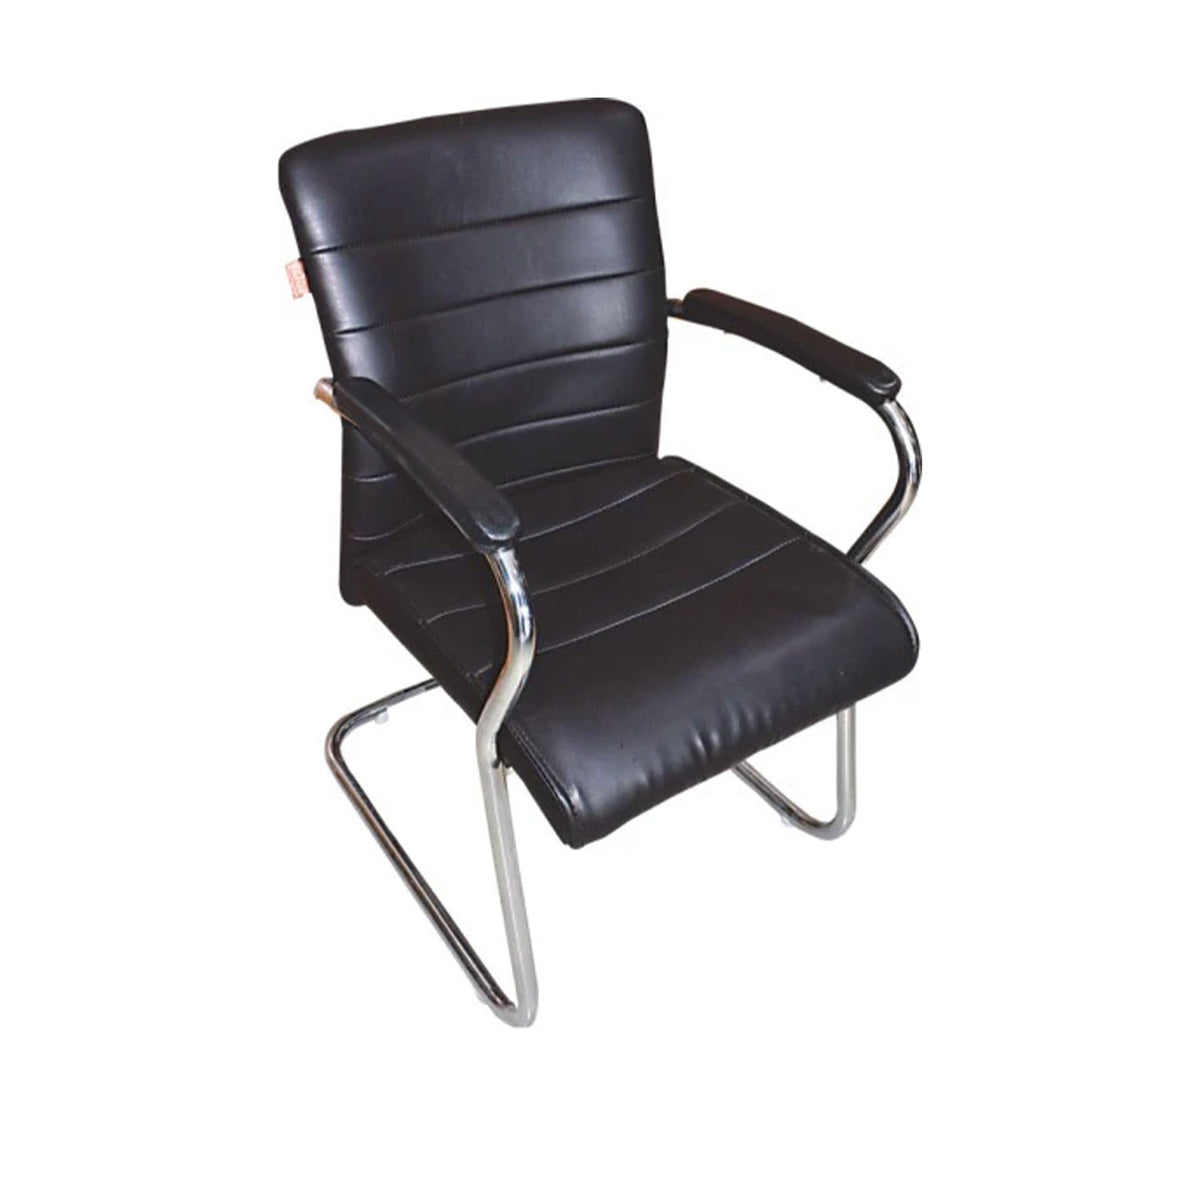 SmileSellers Office Chair Executive Visitor Study Chair with arm Rest with Steel Frame and cushioned seat Back